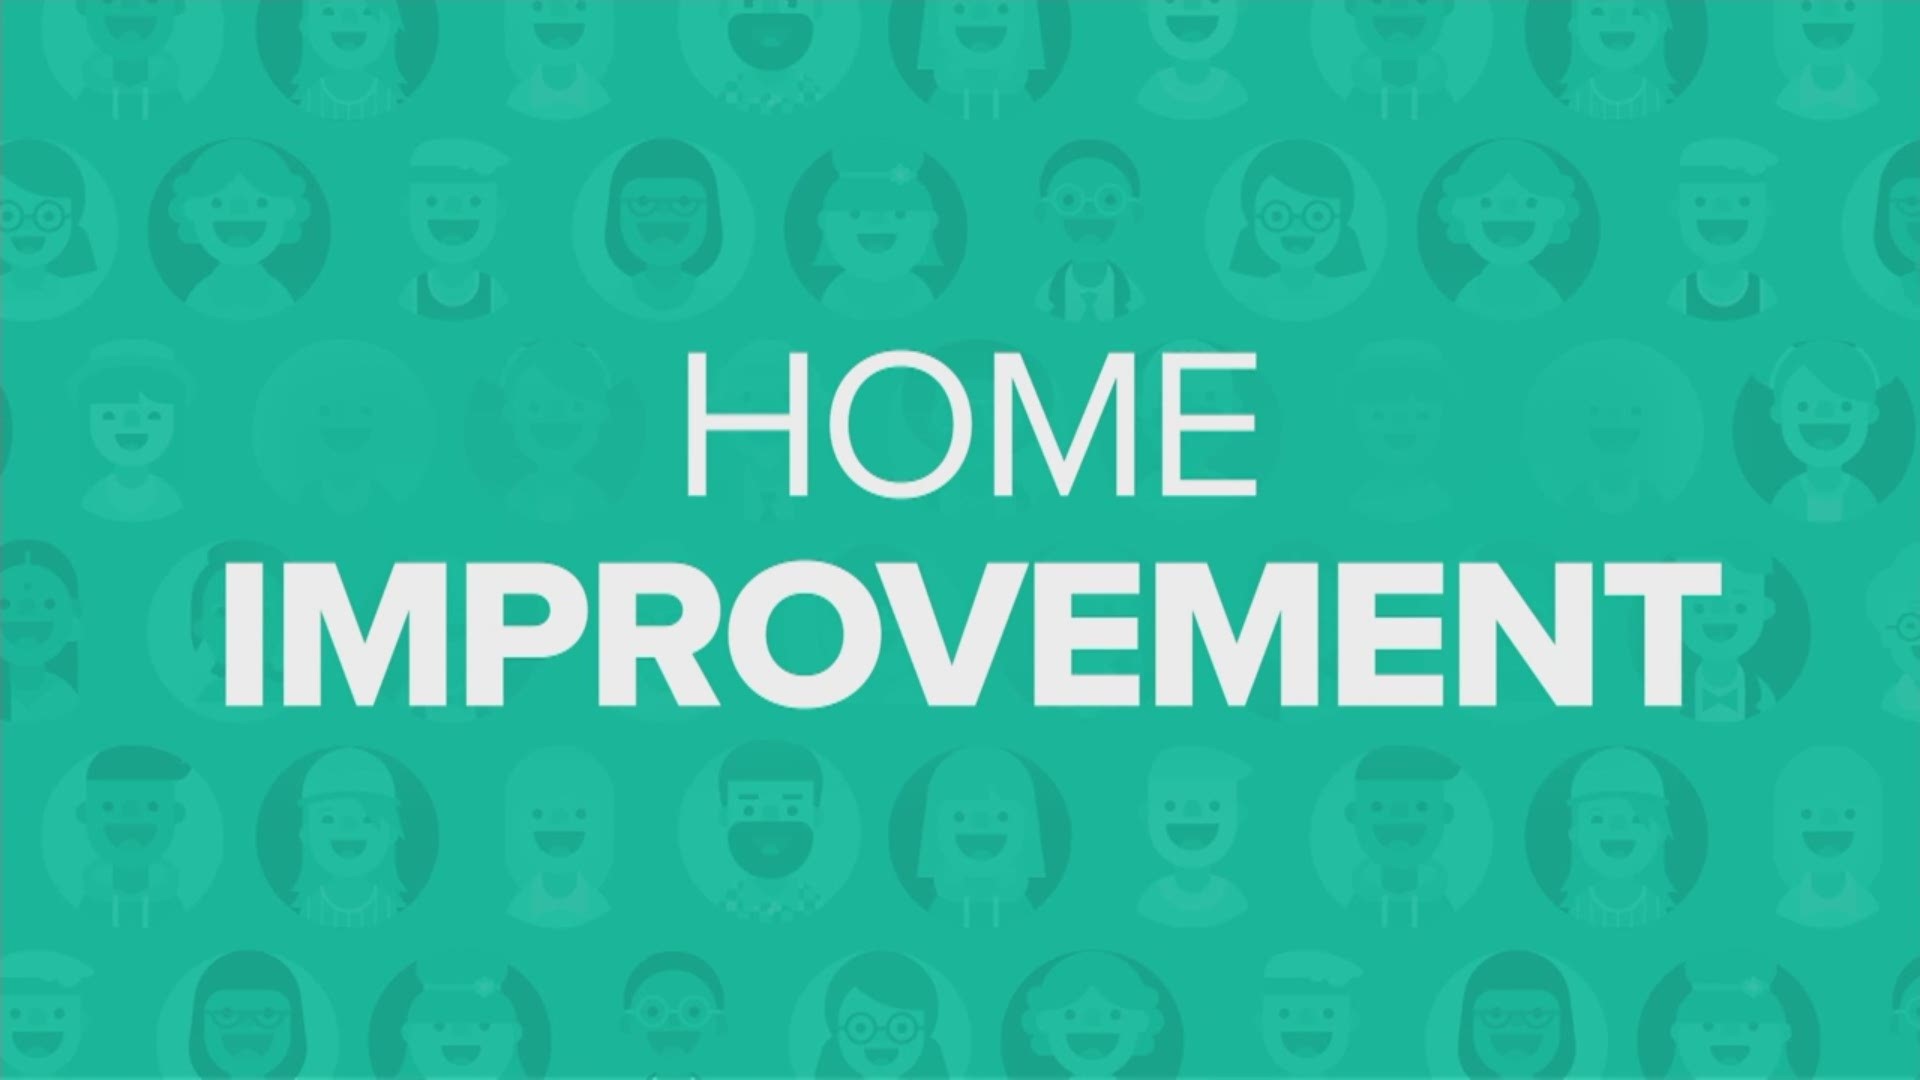 Did you have a new year’s resolution to make improvements in your life? Why not start with your home?